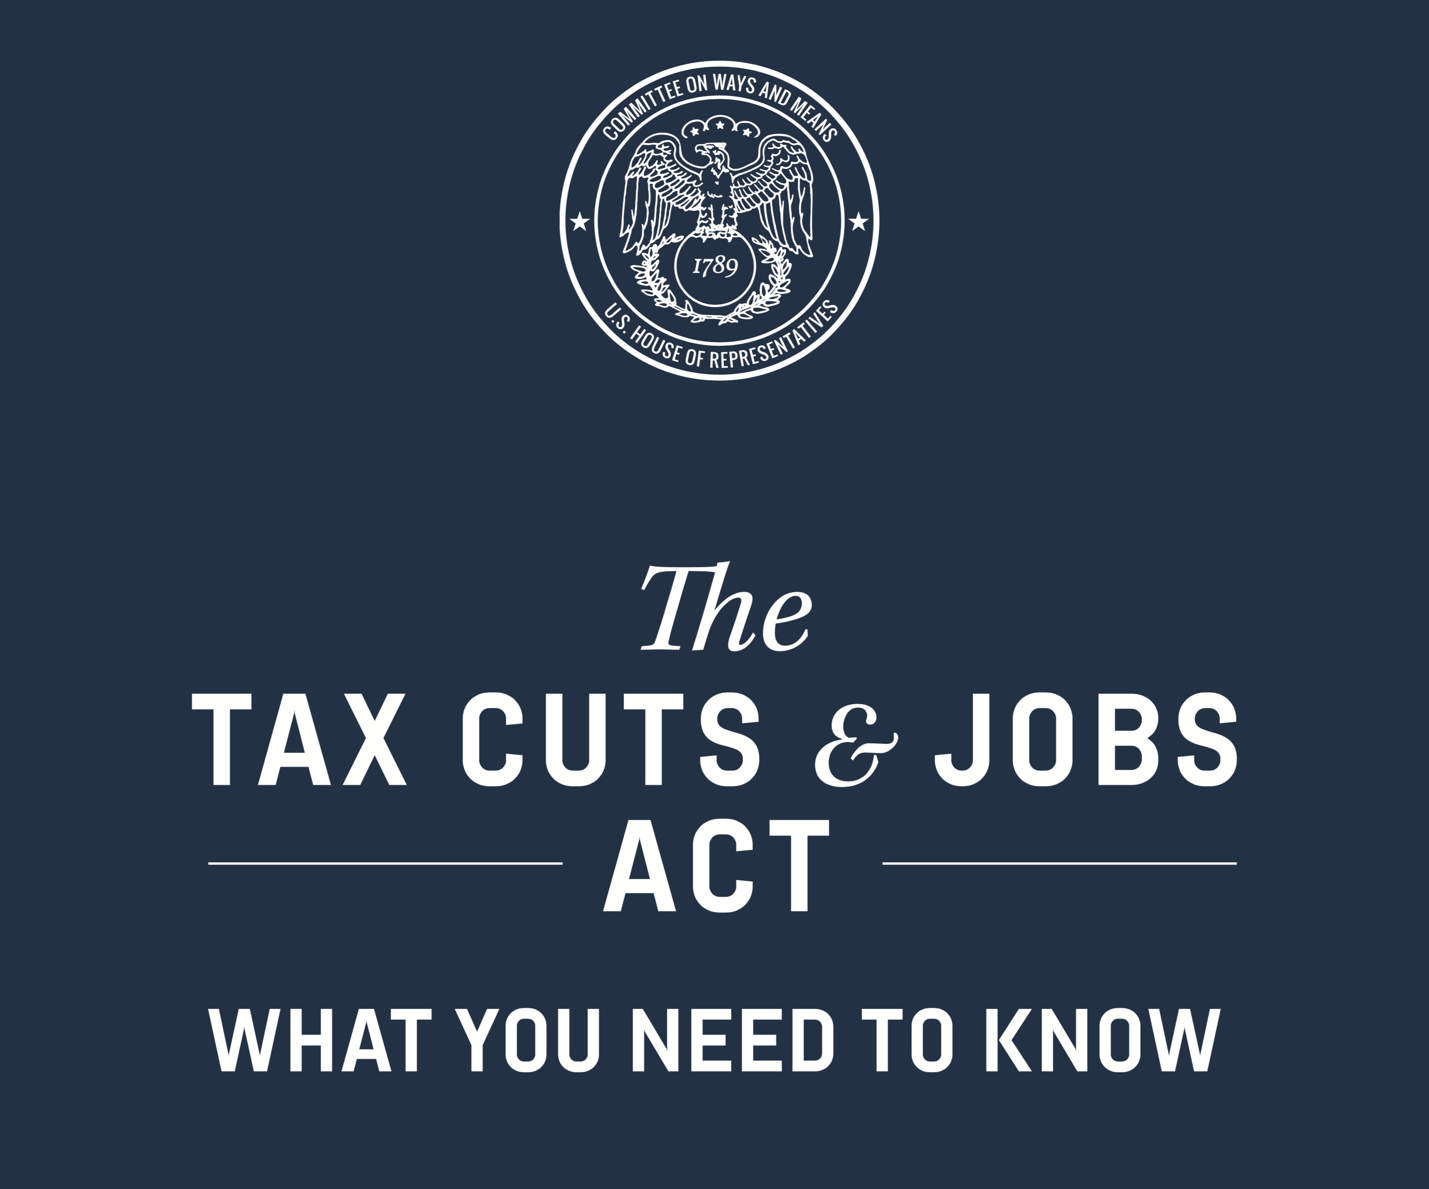 Tax Cuts & Jobs Act Brief Overview